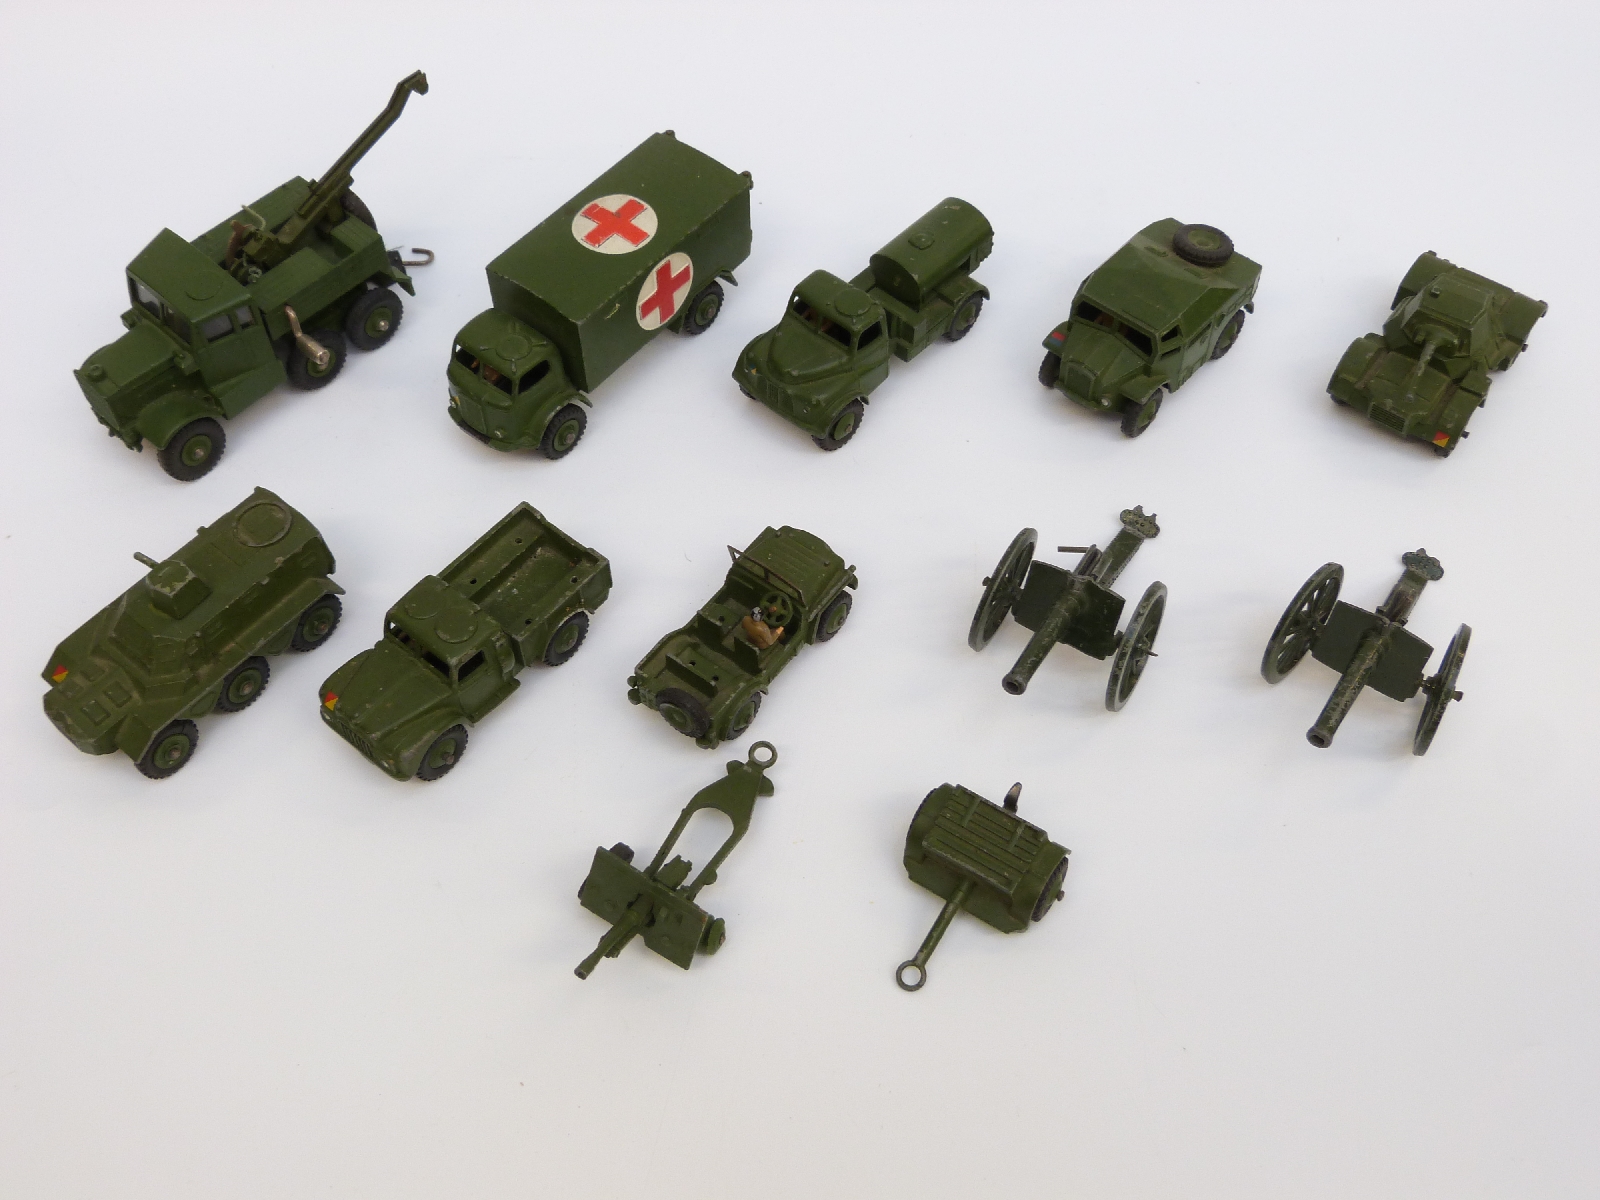 Ten Dinky Toys and Supertoys diecast model military vehicles including Military Ambulance,